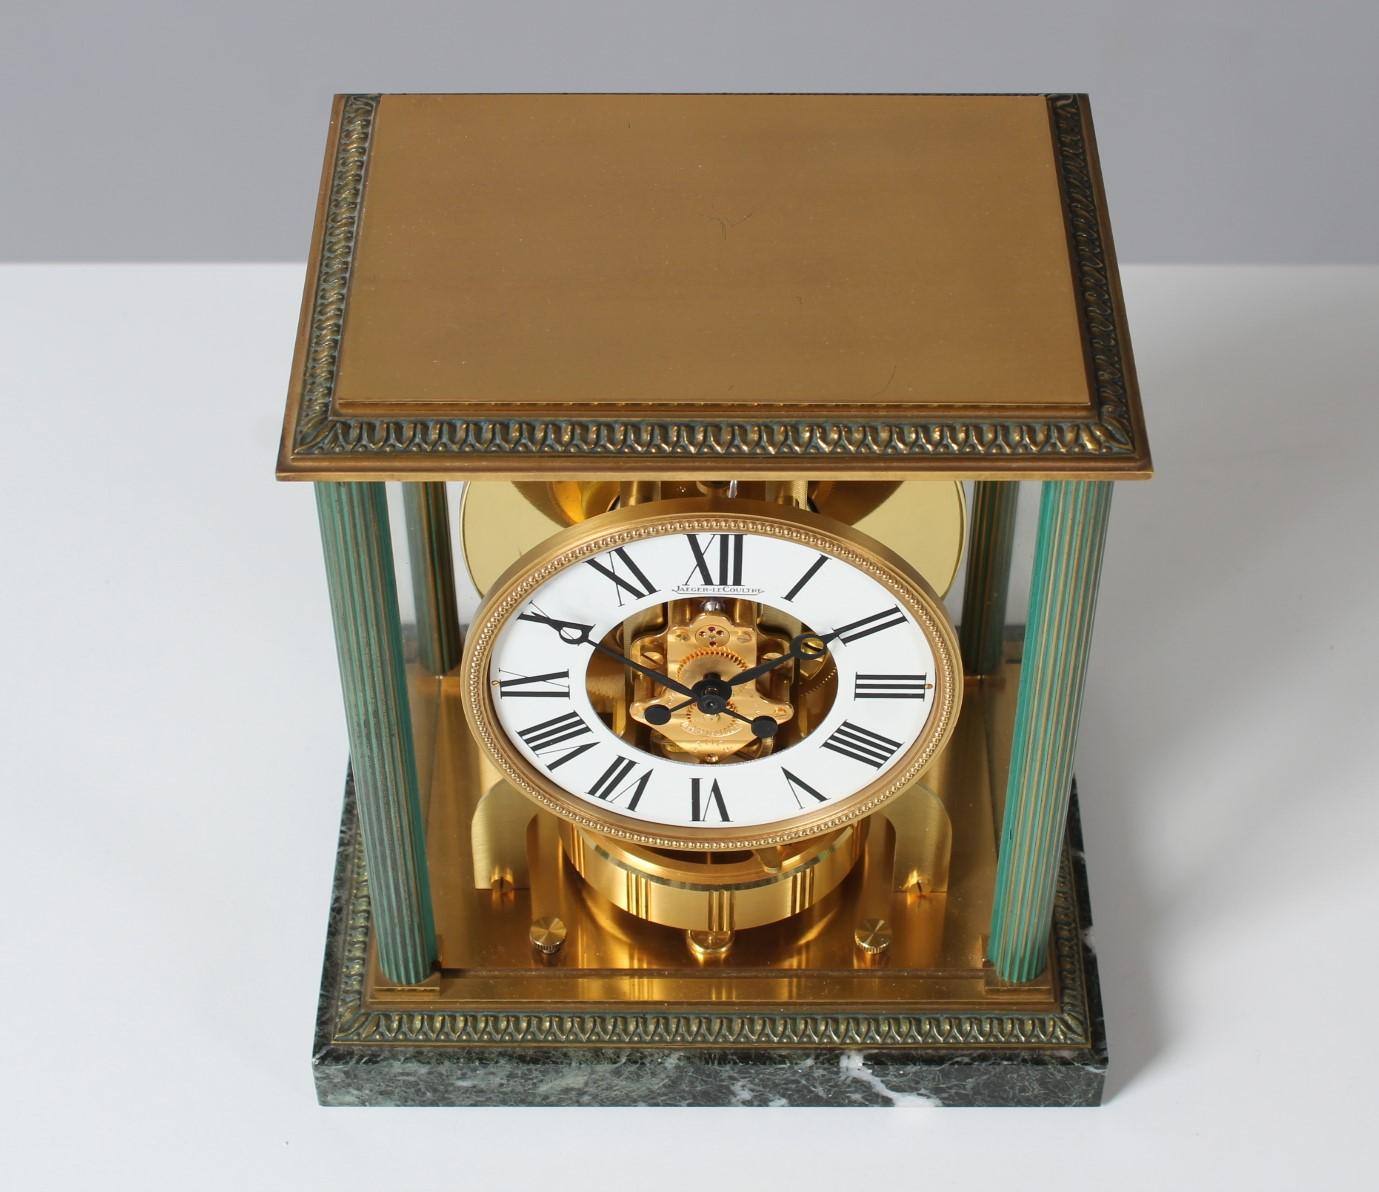 Jaeger LeCoultre - Atmos Vendome

Switzerland
Brass gold plated
Year of manufacture 1965

Dimensions: H x W x D: 24 x 21 x 16 cm

Description:
Atmos Vendome caliber 526. model number 5857 with marble base and fluted columns.
White dial